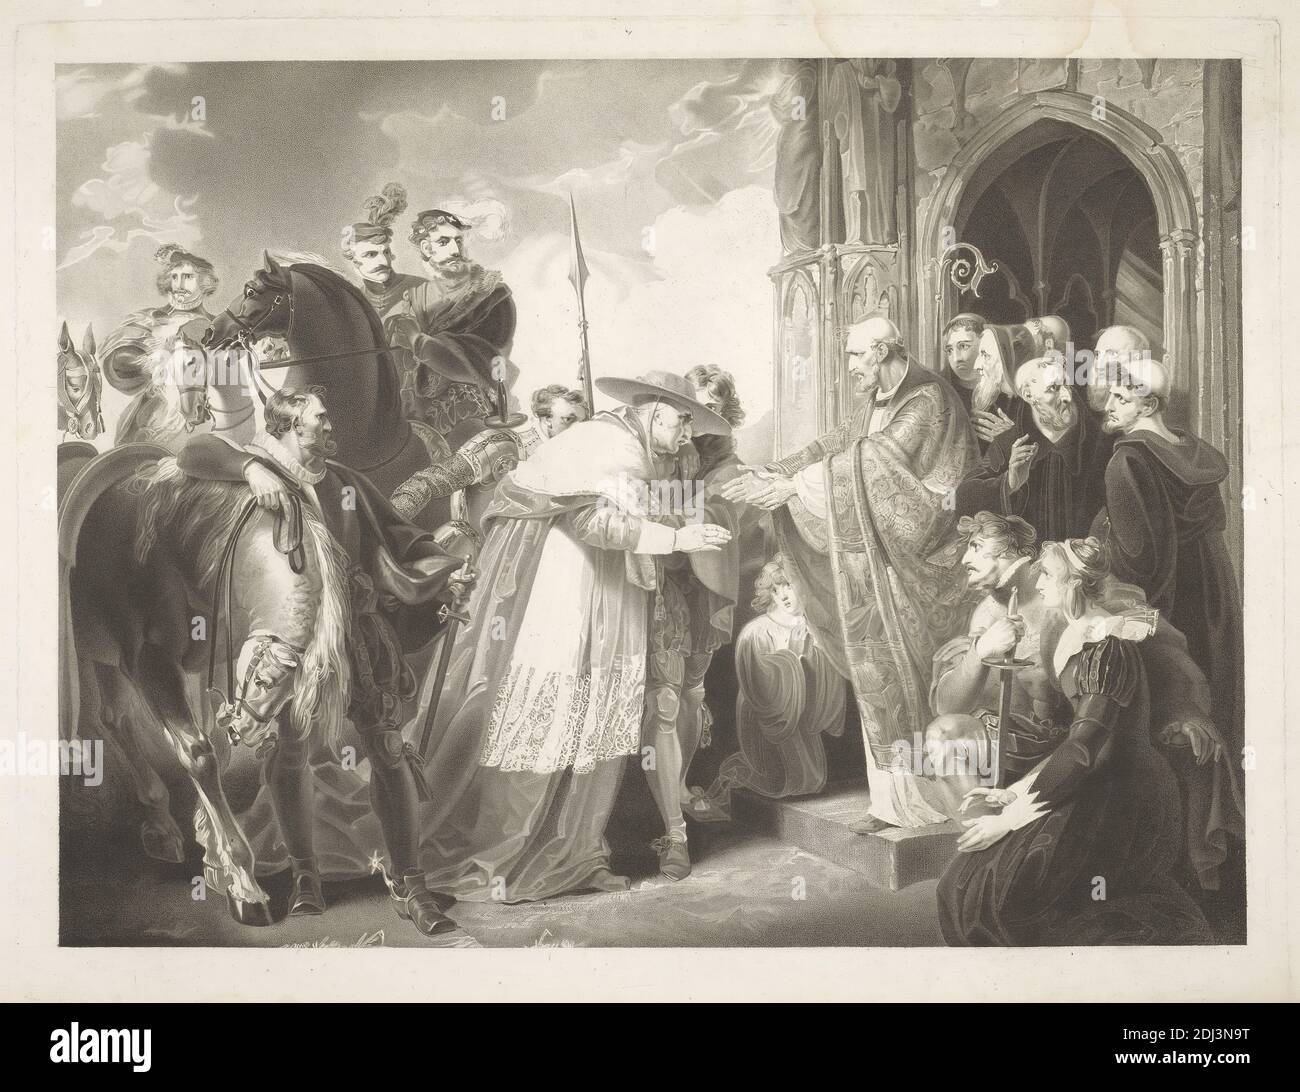 Henry VIII, Act IV, Scene II, Abbey of Leicester. Wolsey, Northumberland, and Attendants, Abbot of Leicester, etc., Robert Thew, 1758–1802, British, after Richard Westall, 1765–1836, British, 1803, Engraving, Sheet: 17 5/16 x 23 1/4in. (44 x 59.1cm Stock Photo